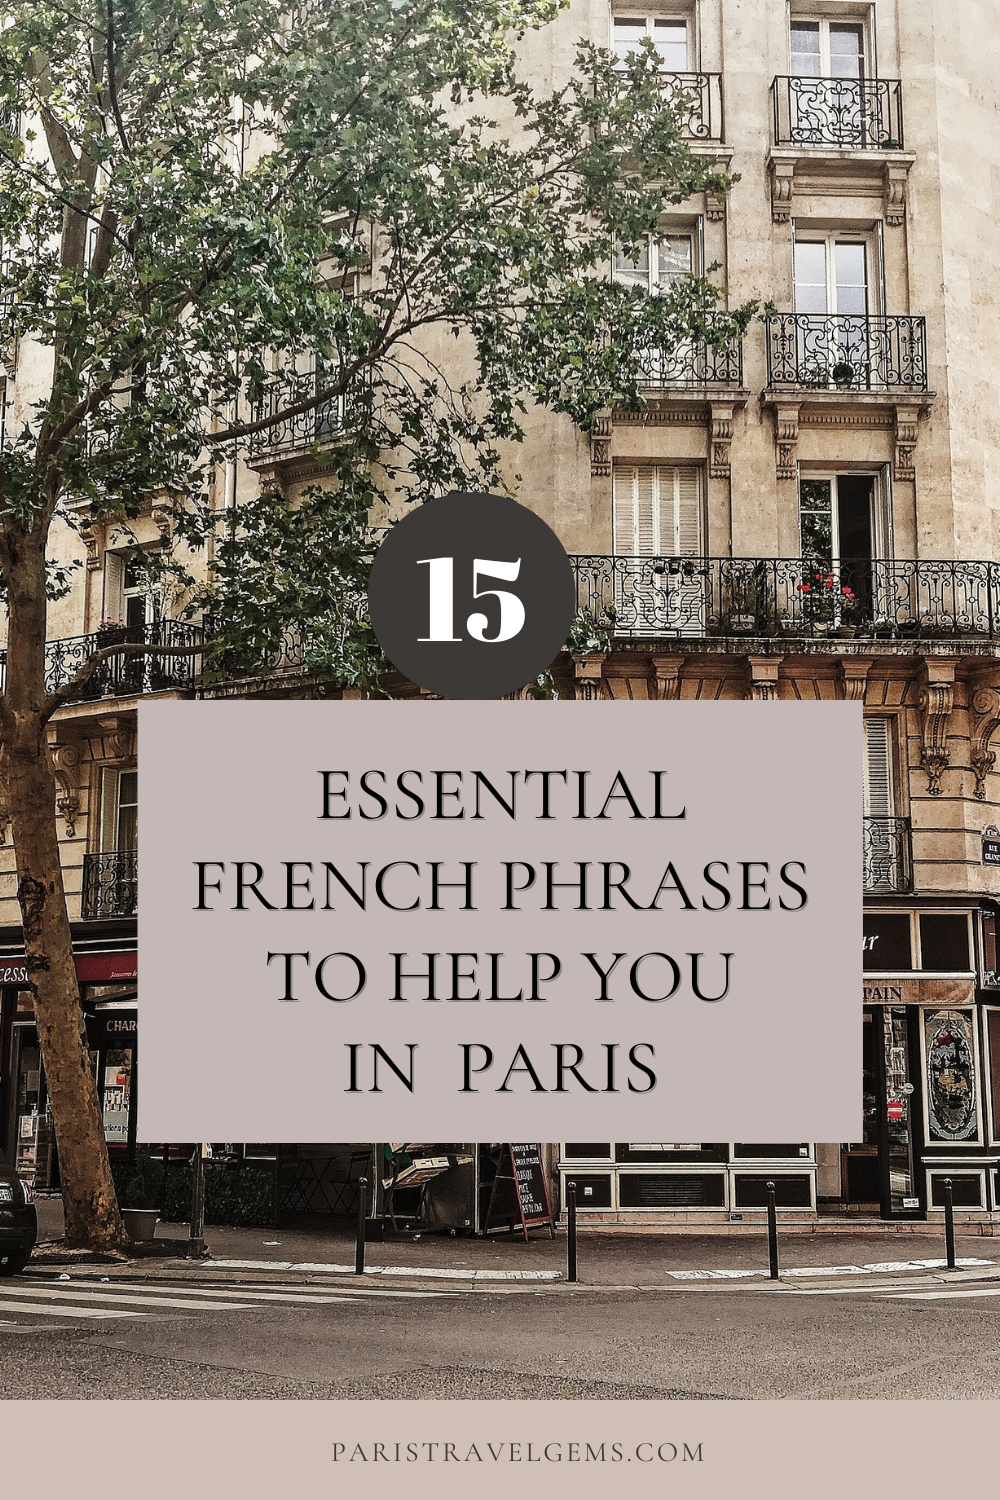 15 Esssential French Phrases To Help You In Paris